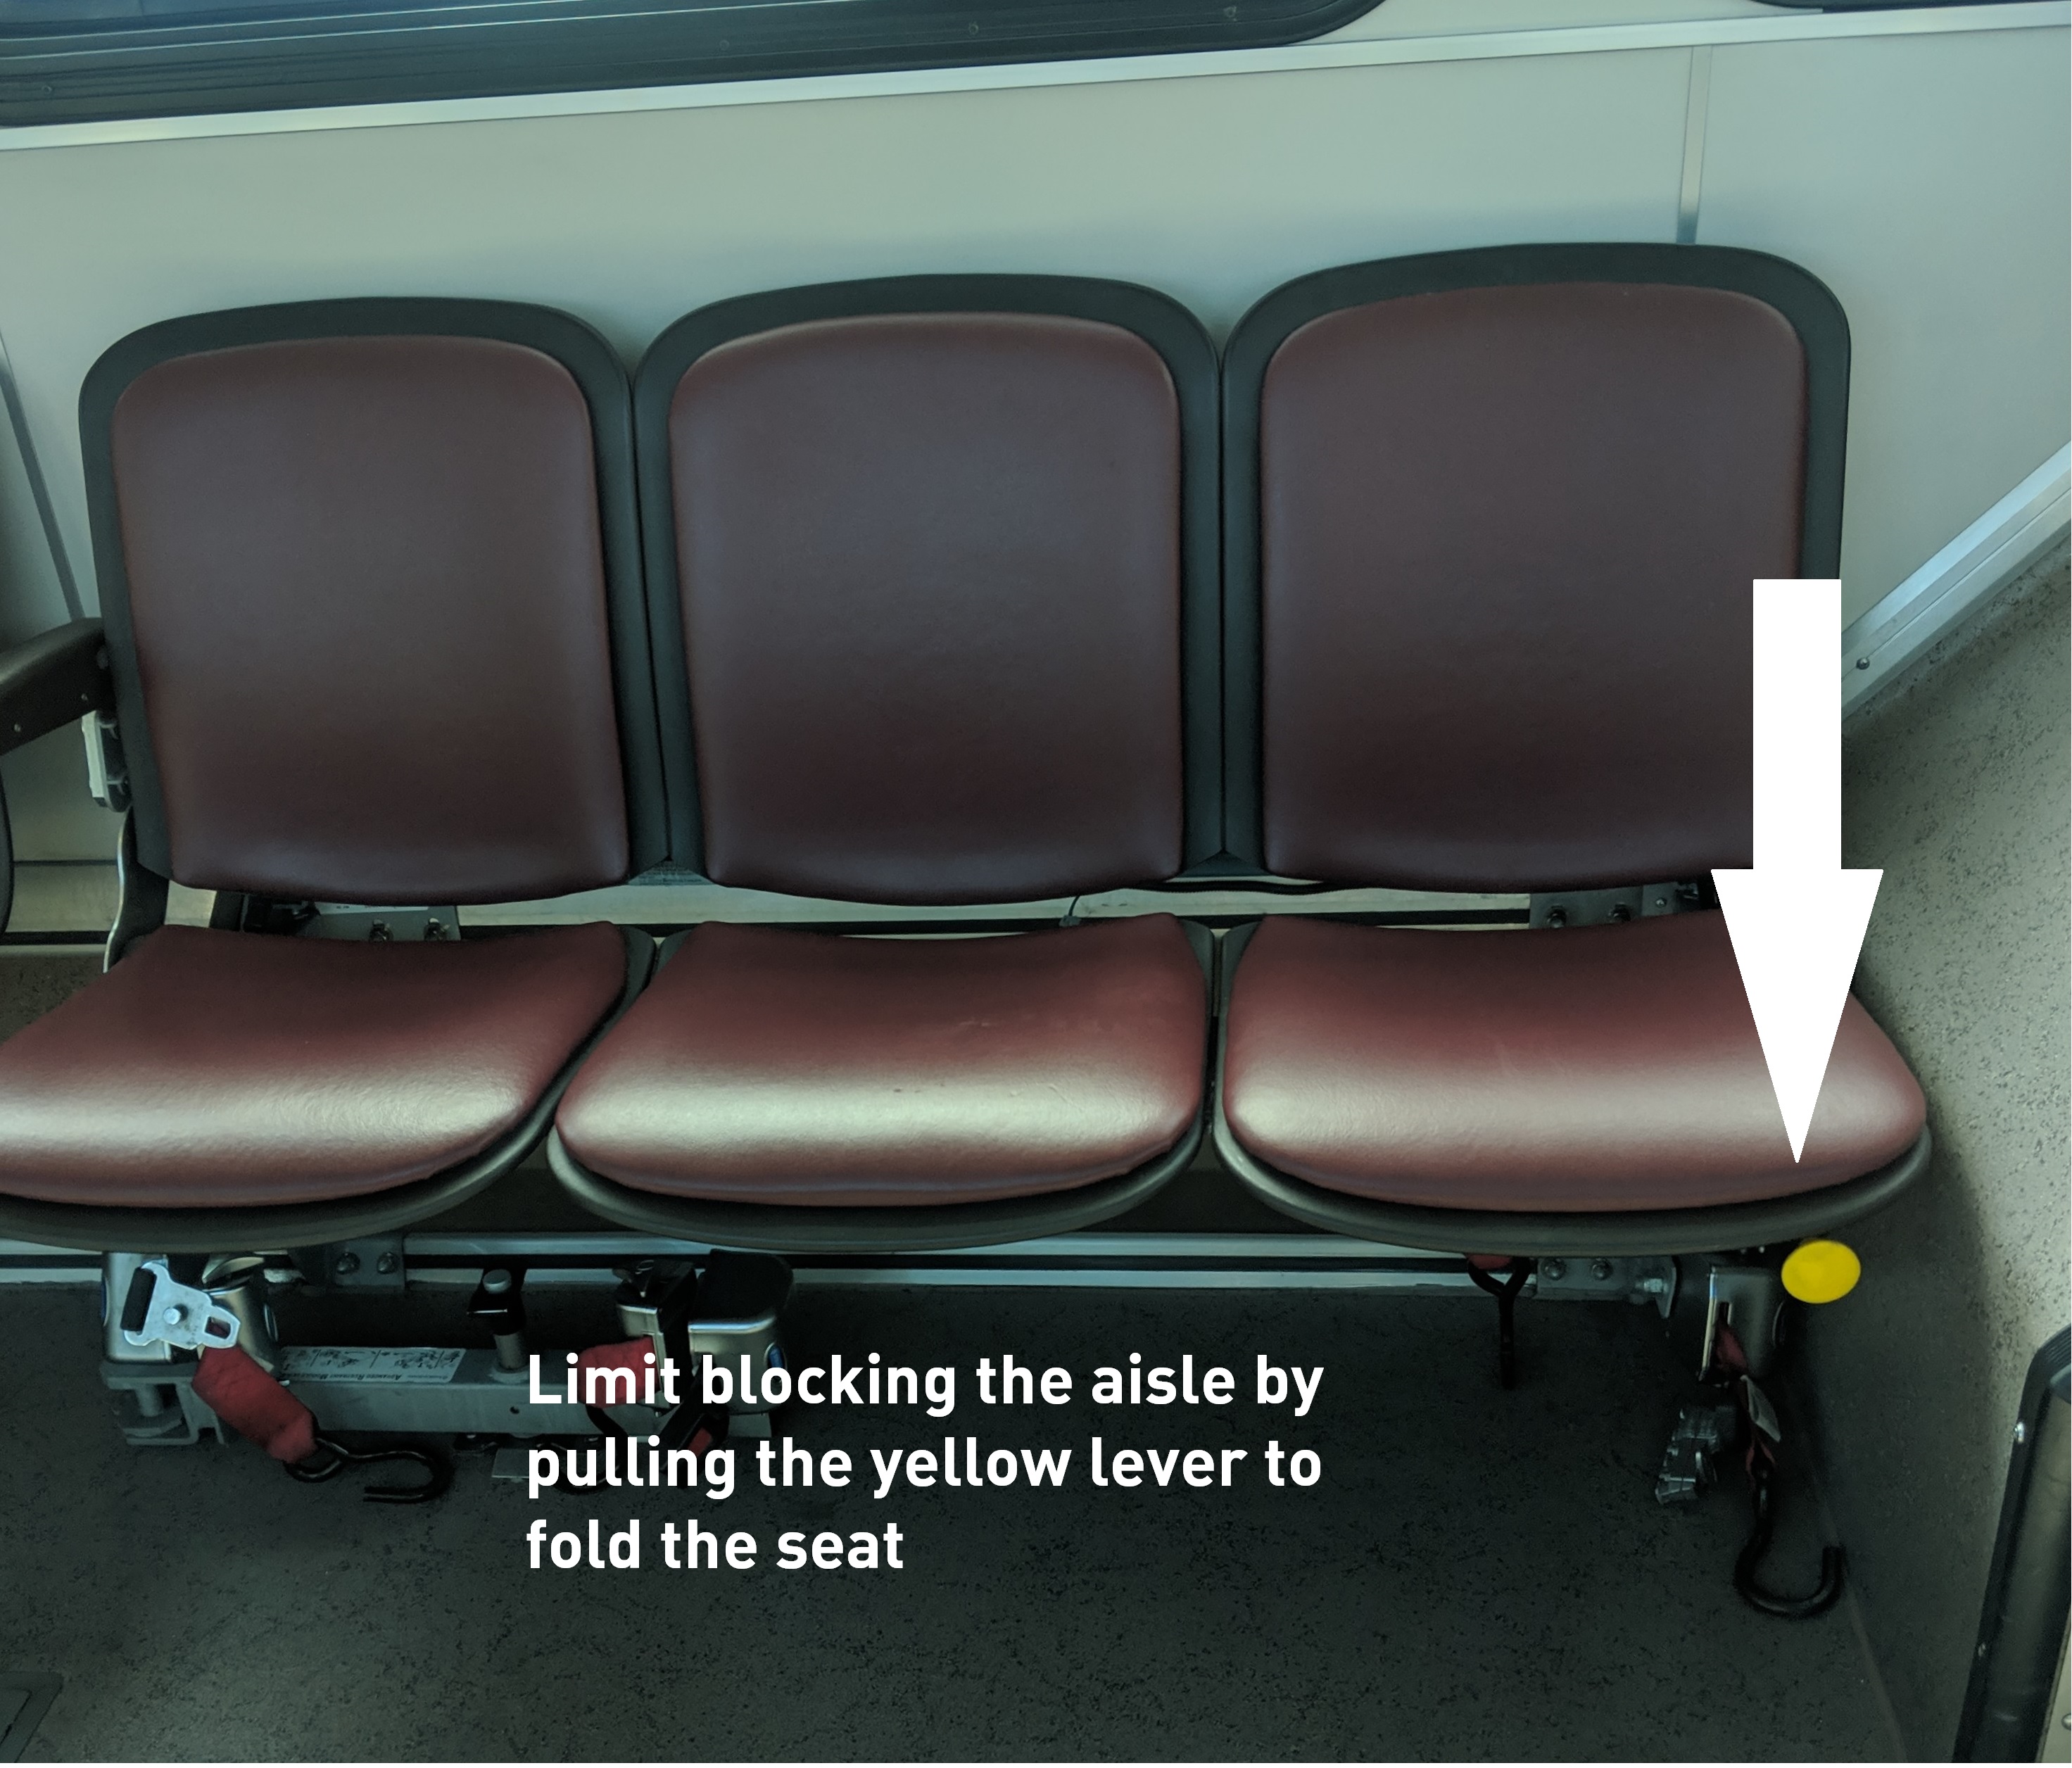 Graphic showing where to pull lever to fold the seat on the bus